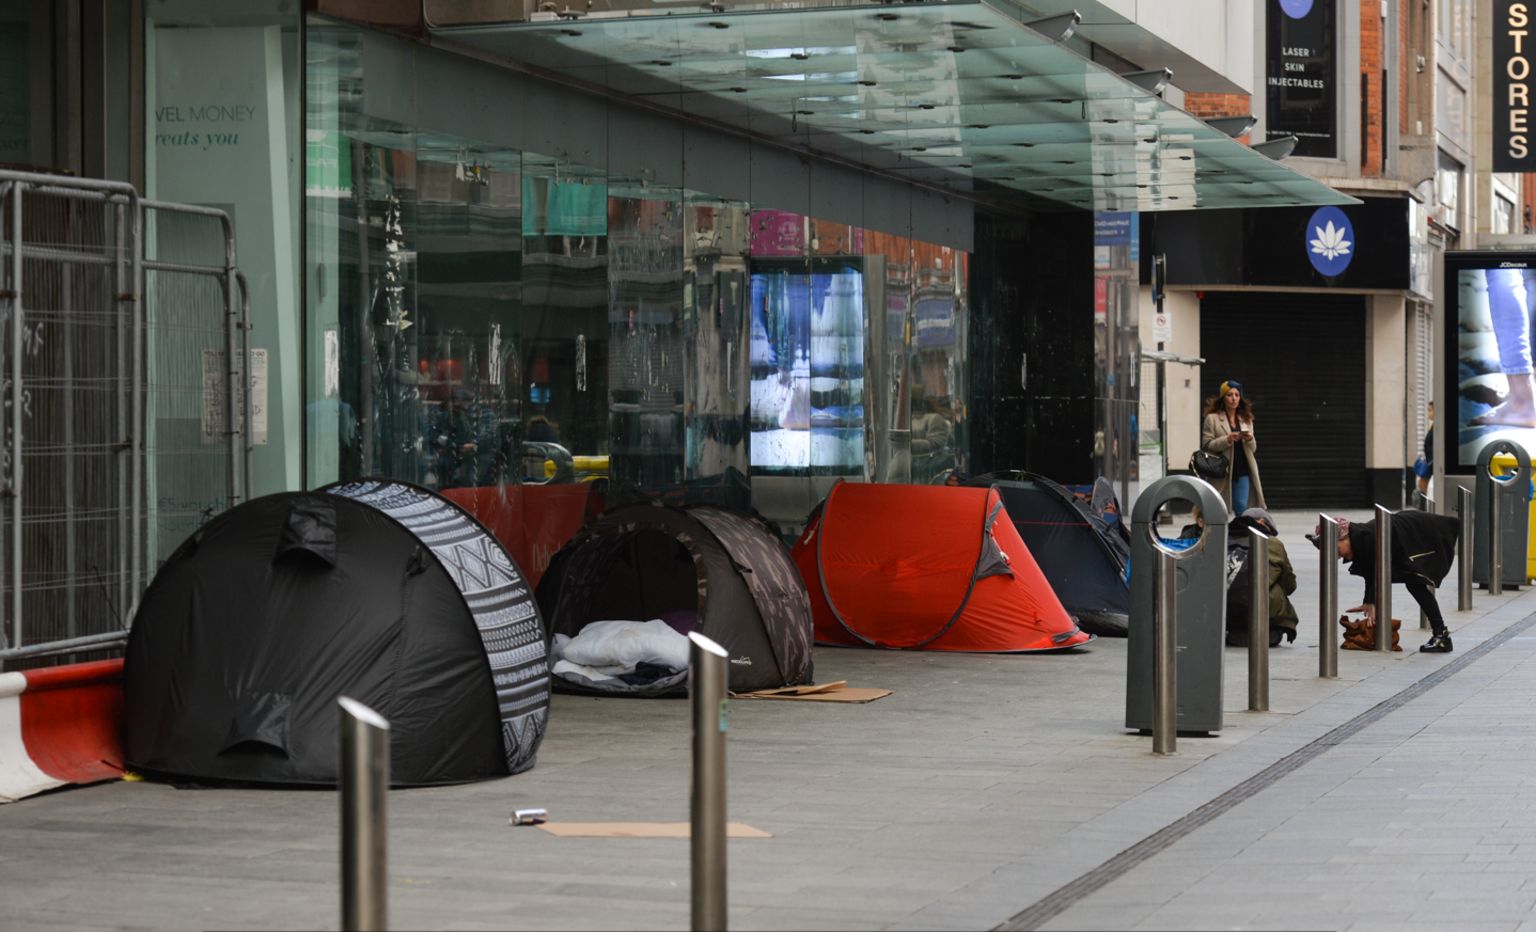 A view of a rough sleeper's tents outside a closed shop on Henry Street in Dublin city centre